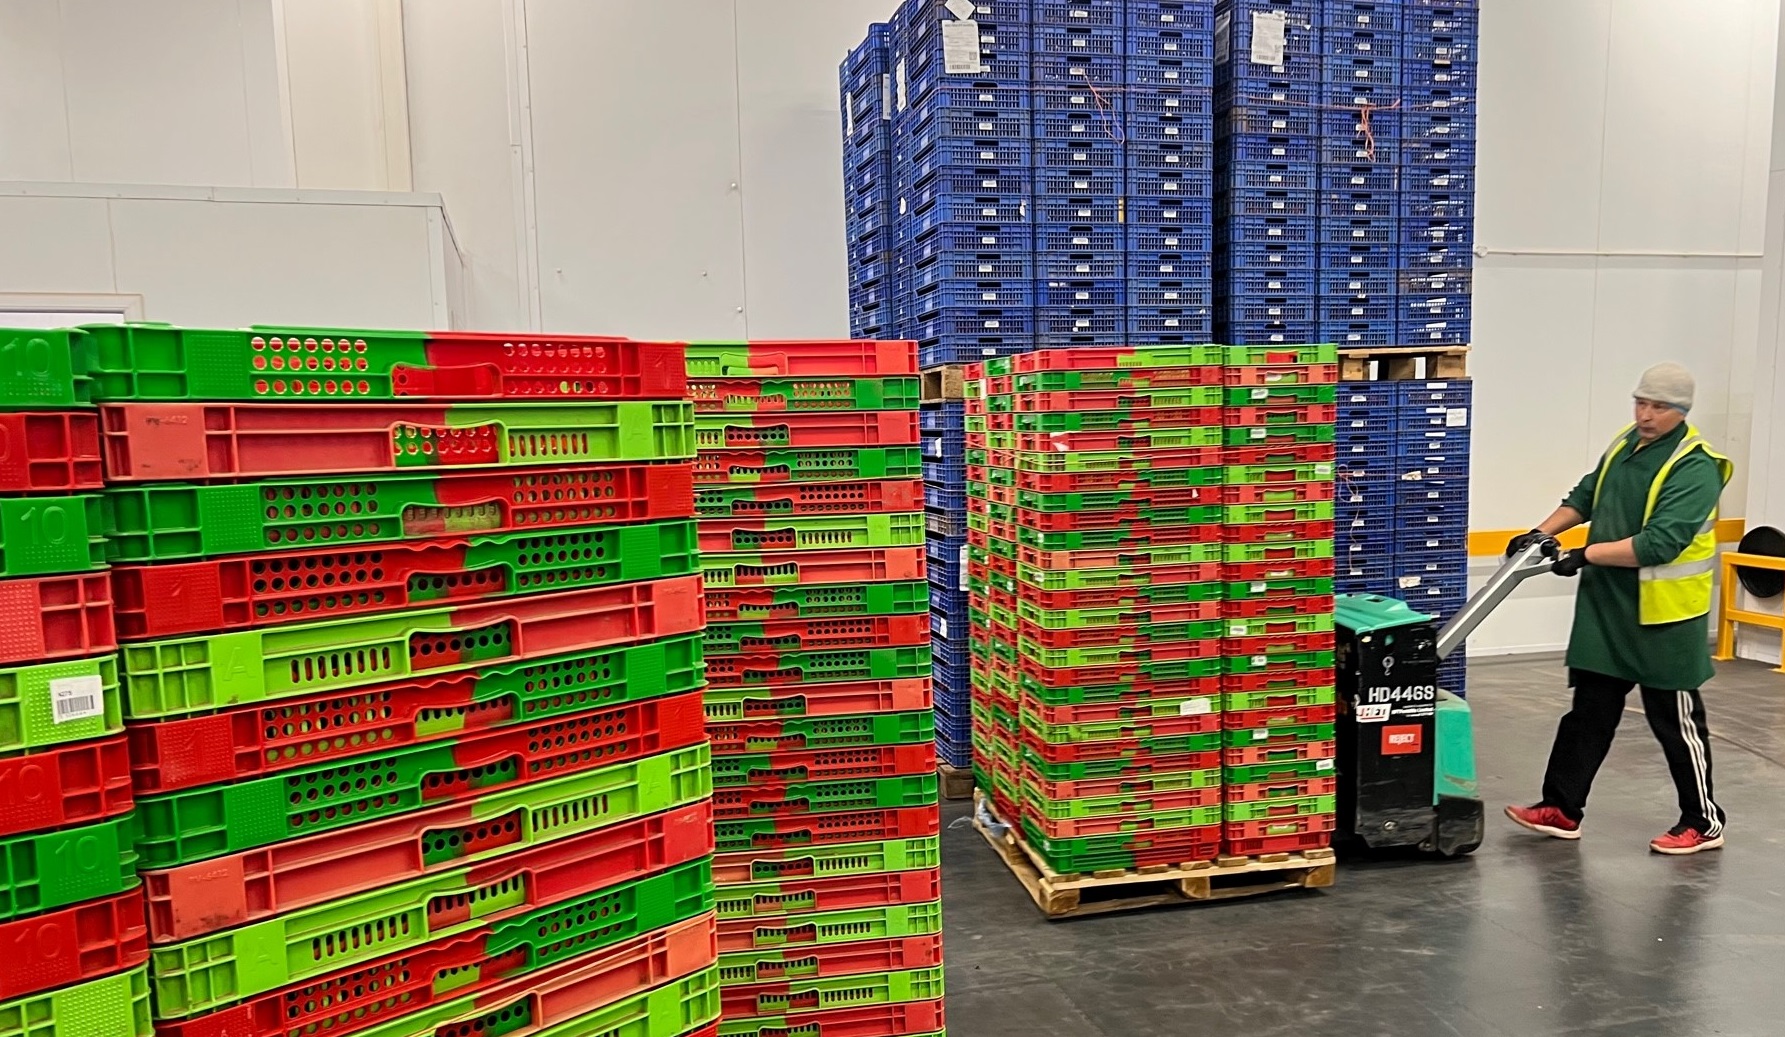 Stacked fruit boxes moved in the Wye Fruit packing area, using a handheld pallet truck, operated on Ecotile interlocking floor tiles